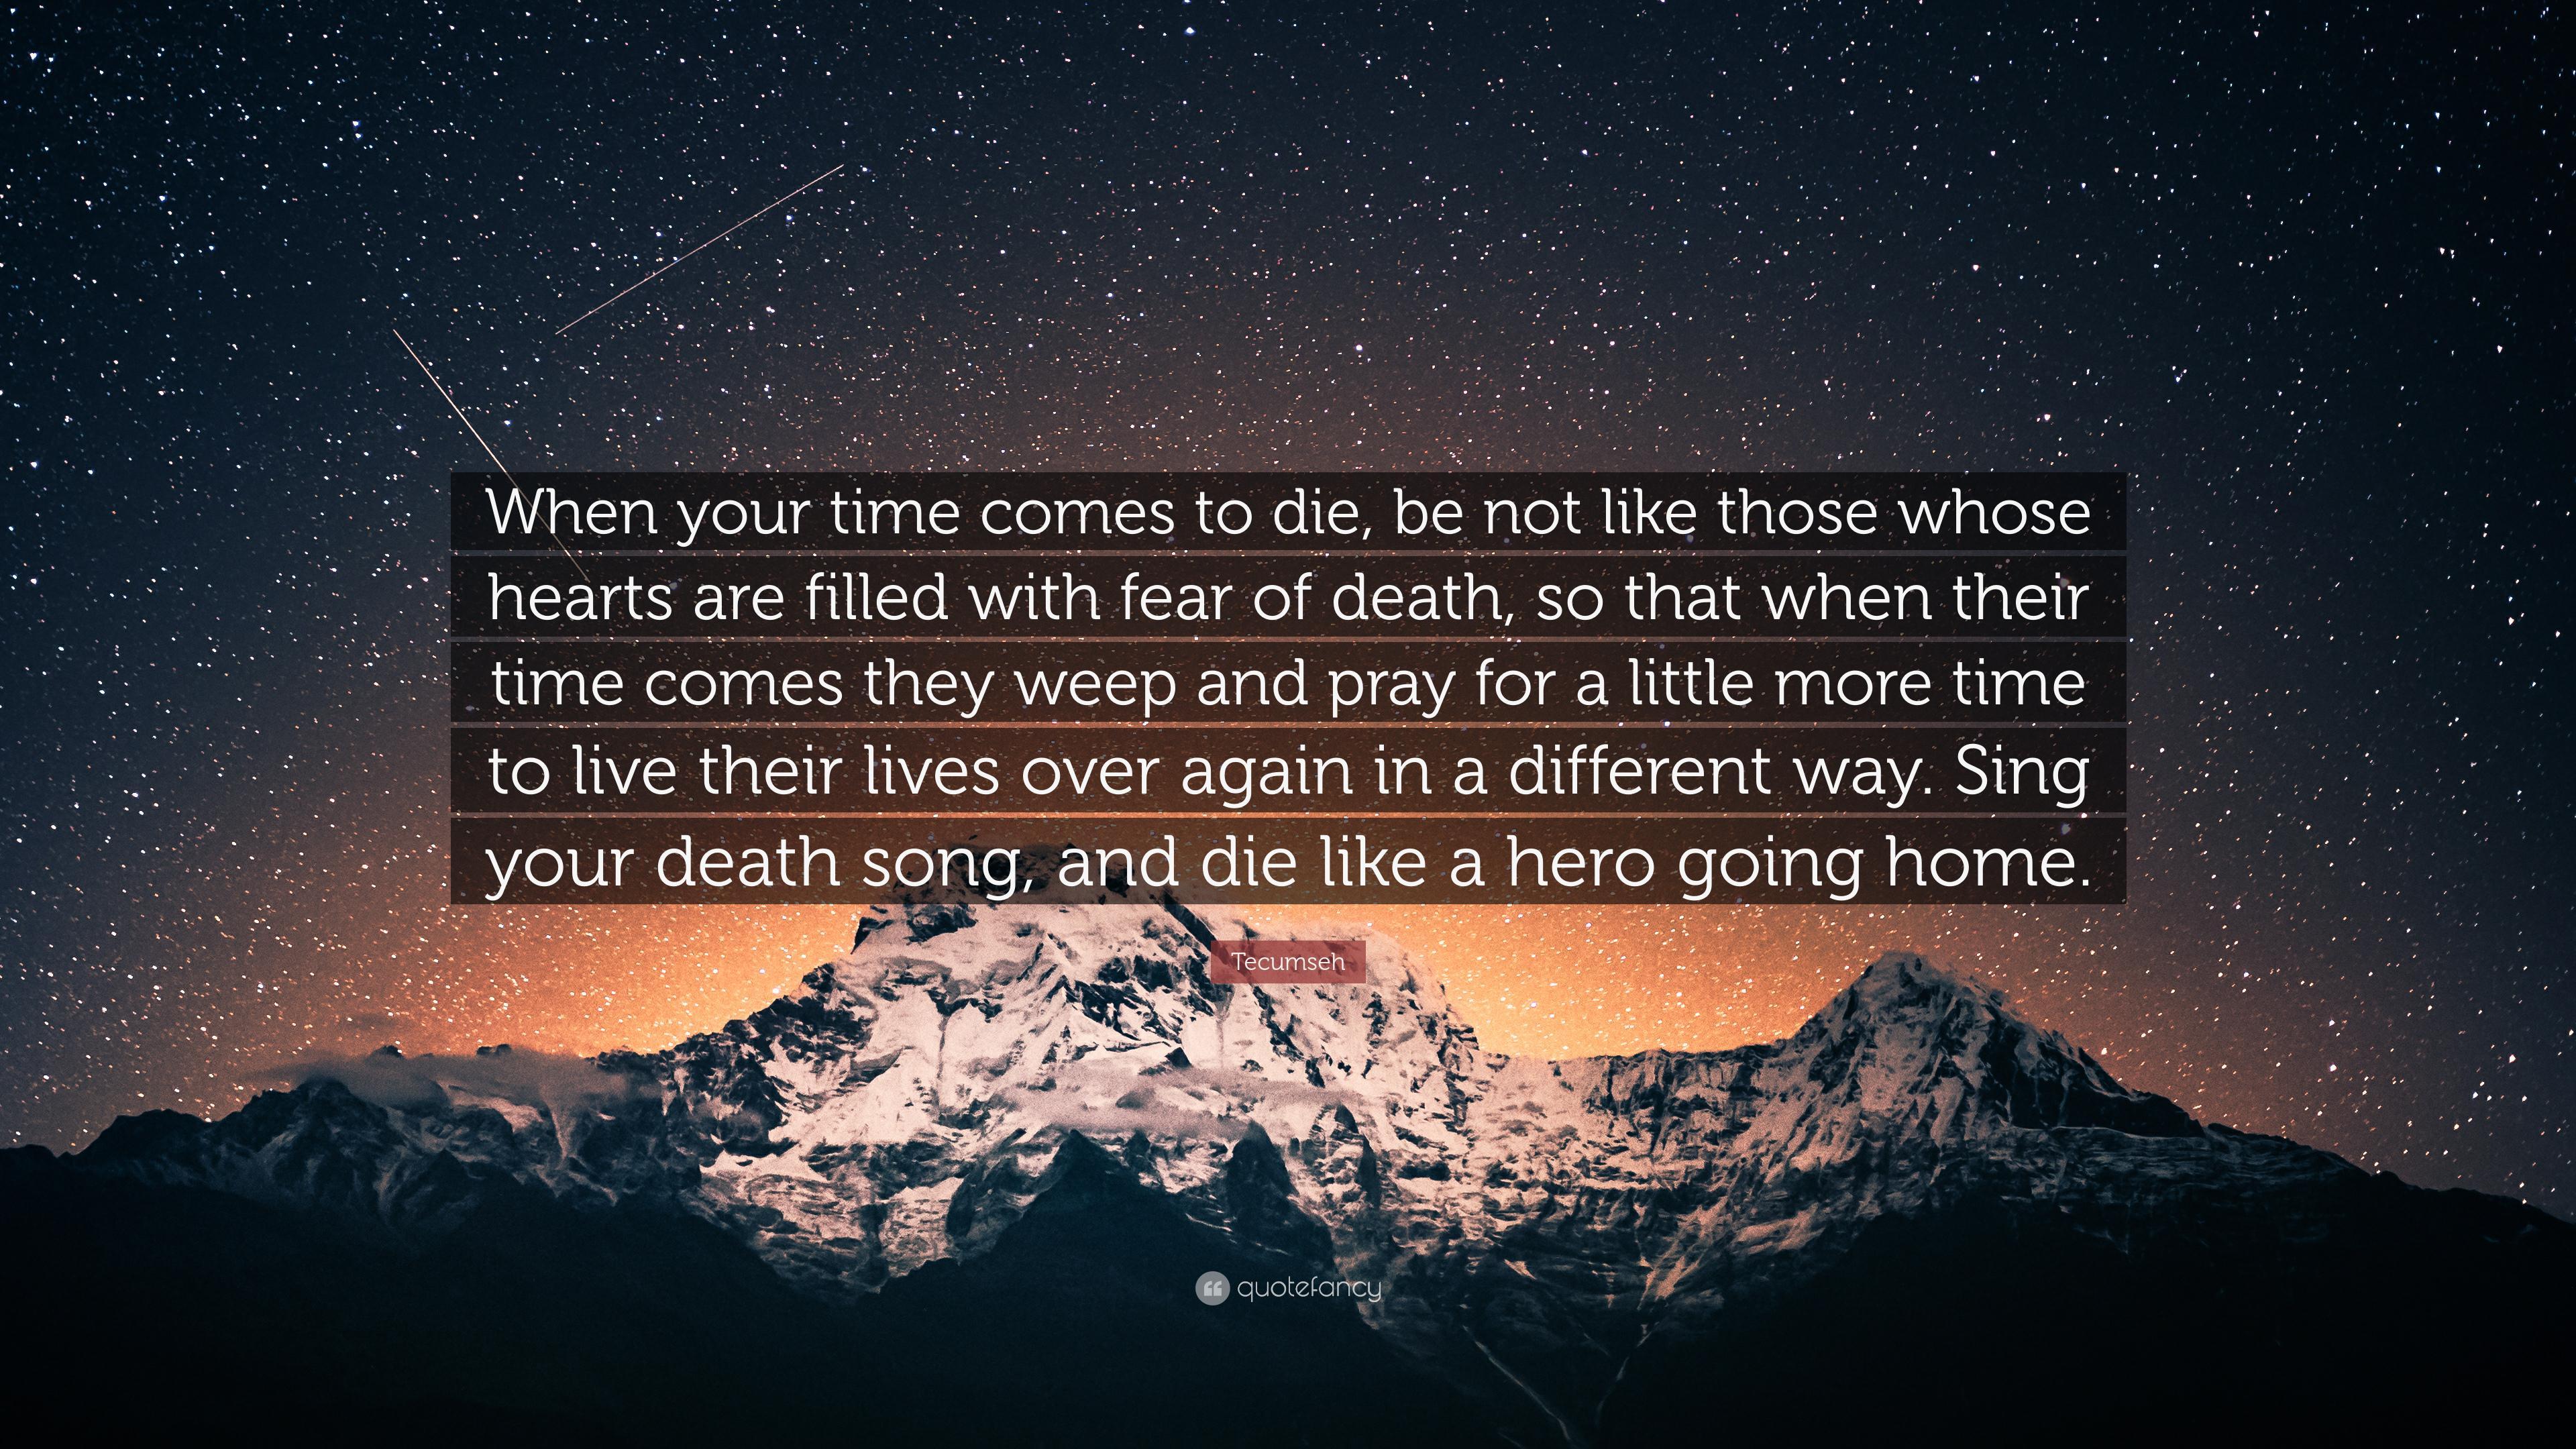 Tecumseh Quote: “When your time comes to die, be not like